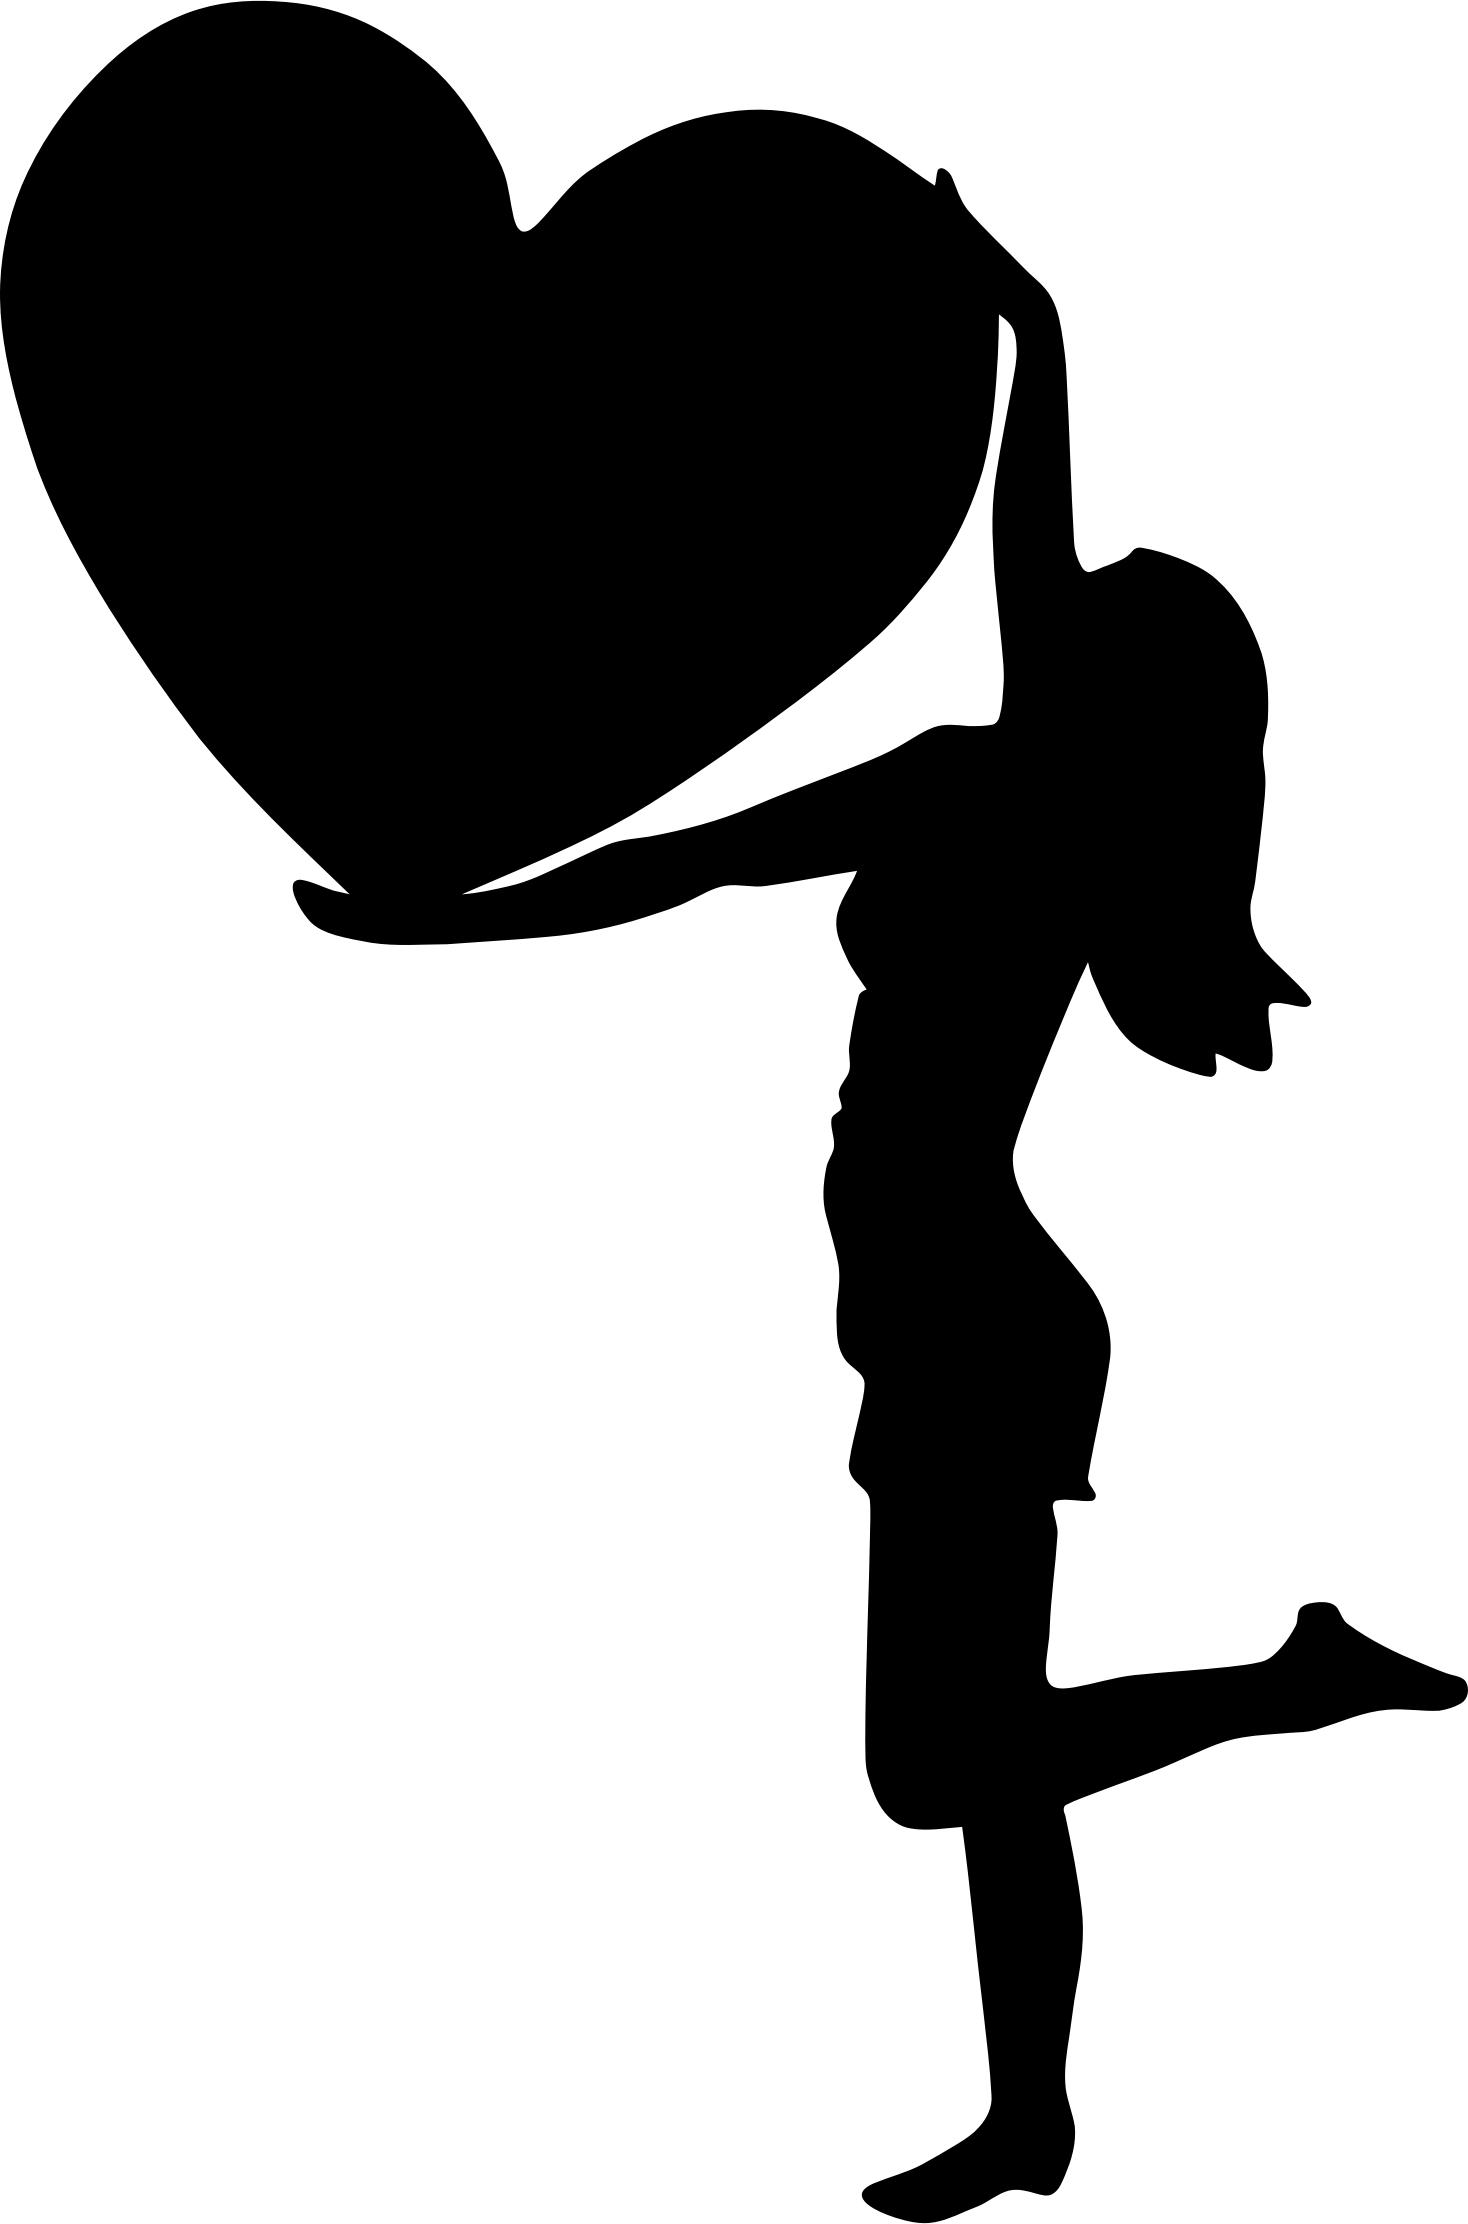 Woman With Big Heart Silhouette png